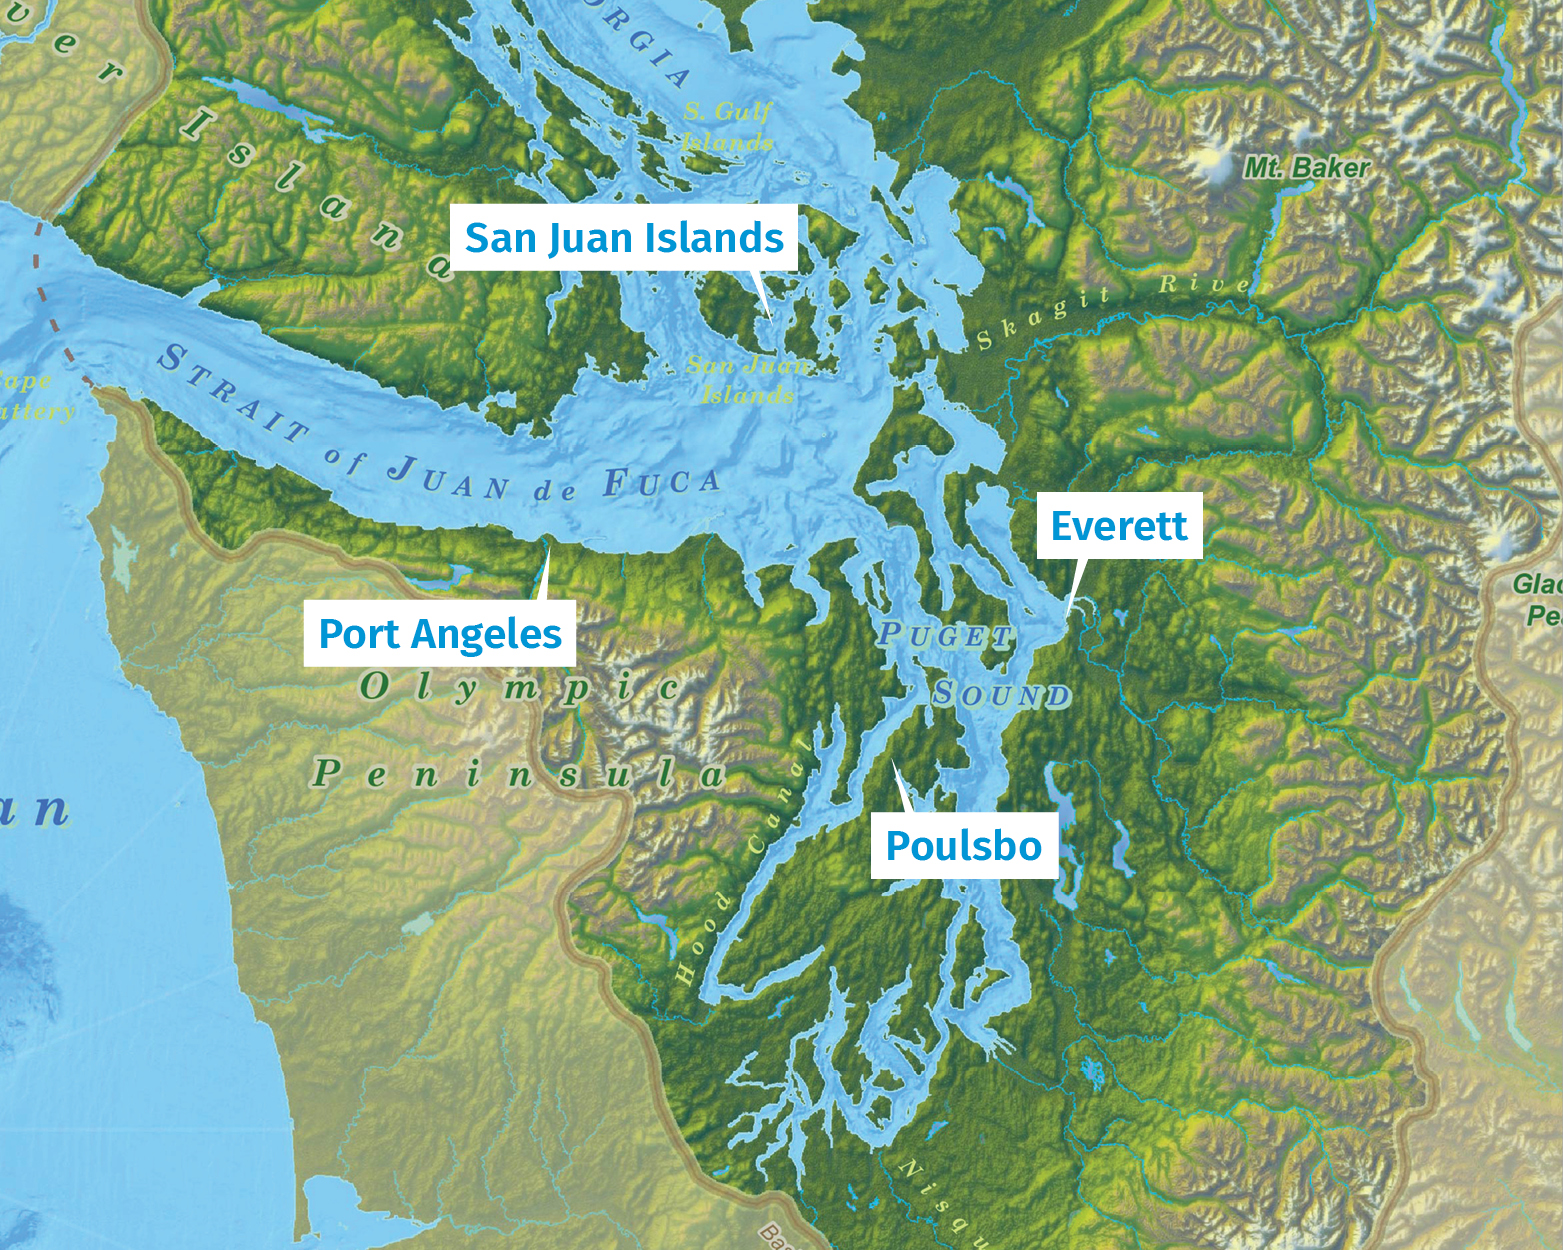 Map of the Salish Sea & Surrounding Basin with WWU locations in Everett, Poulsbo, Port Angeles, and San Juan Island located. Credit: Stefan Freelan, WWU, 2009